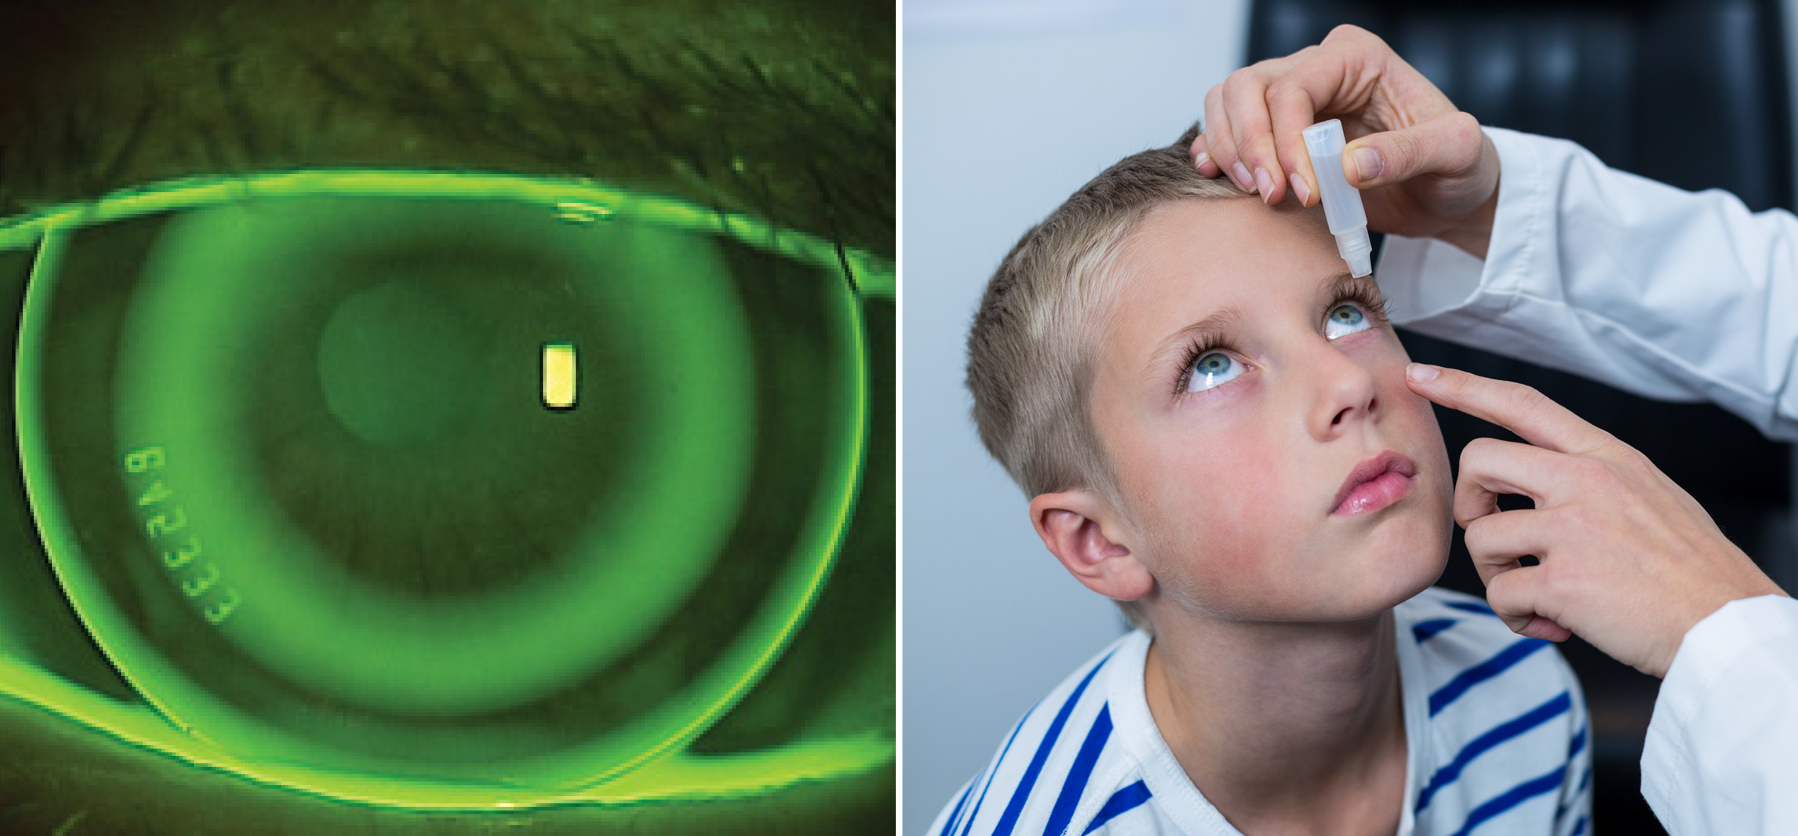 Ortho-K and atropine are effective in preventing and controlling myopia.